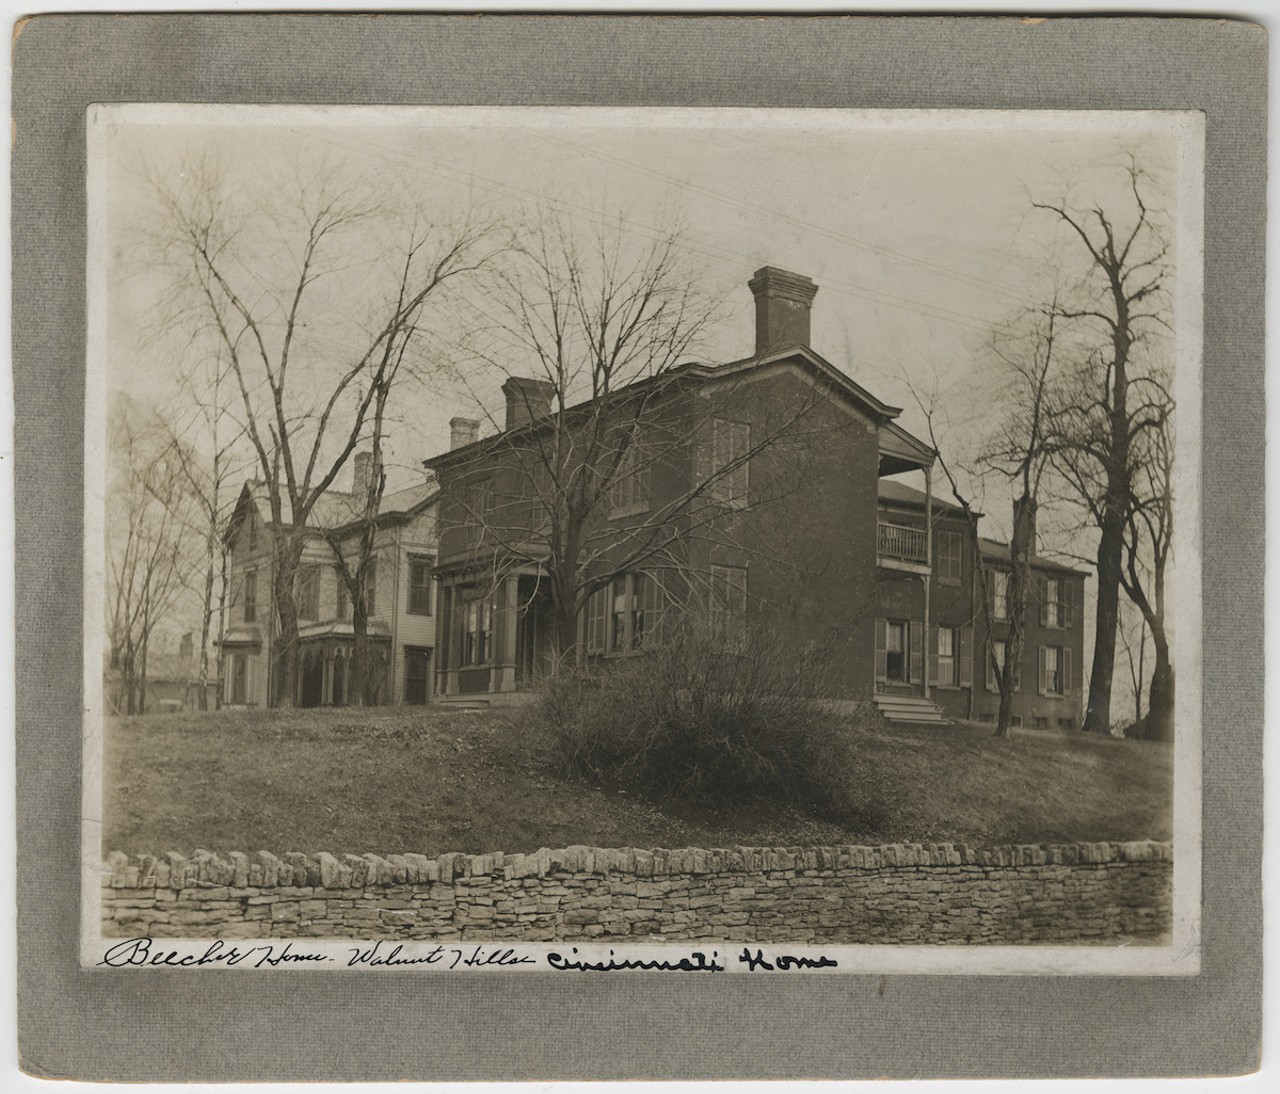 Harriet Beecher Stowe's home, 1900
2950 Gilbert Ave. in Walnut Hills is most notable as being the home of Harriet Beecher Stowe and the Beecher family in the 1830s. It later became a boarding house and then the Edgemont Inn in the 1930s. In the 1940s, the Harriet Beecher Stowe Home Memorial Association raised the money to buy the home and turn it into a museum honoring Harriet Beecher Stowe.